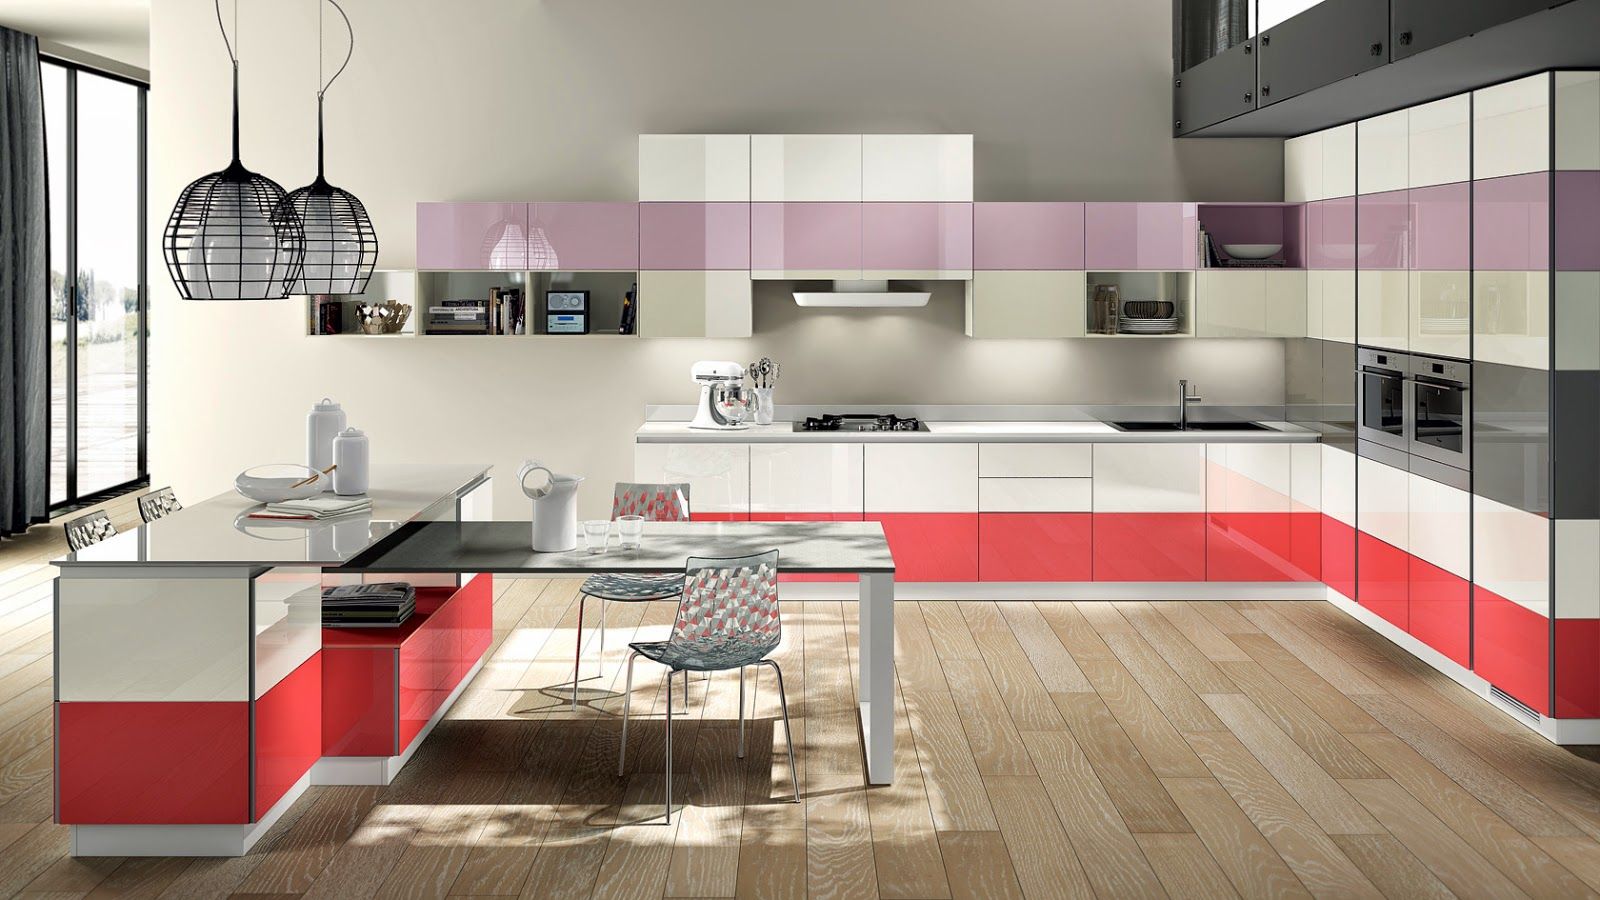 modular kitchen in Indore , colors kitchen gallery colors kitchen gallery Cozinhas modernas MDF